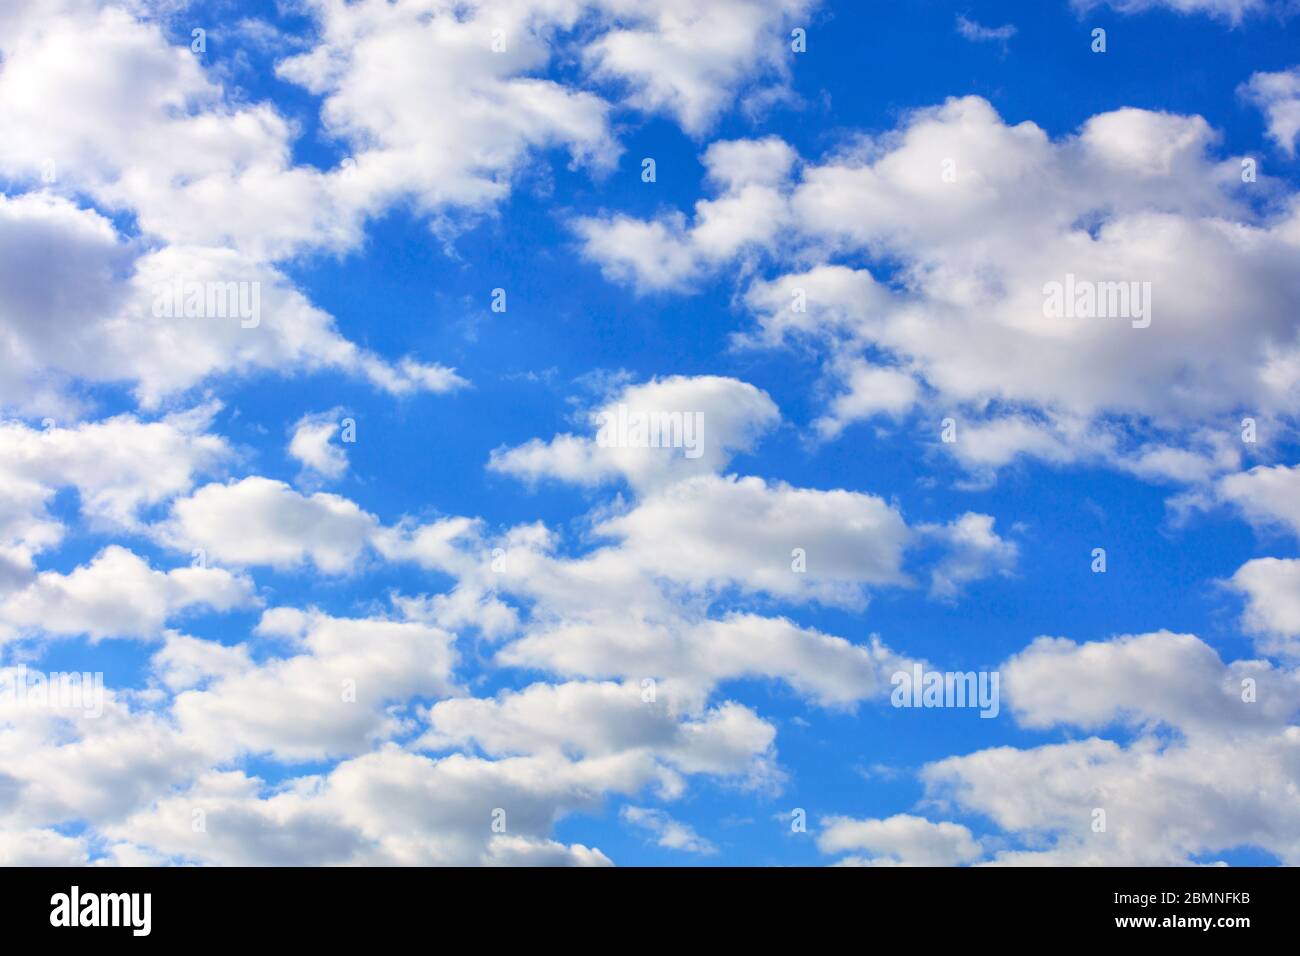 Blue sky with white fluffy clouds floating high above your head. Stock Photo